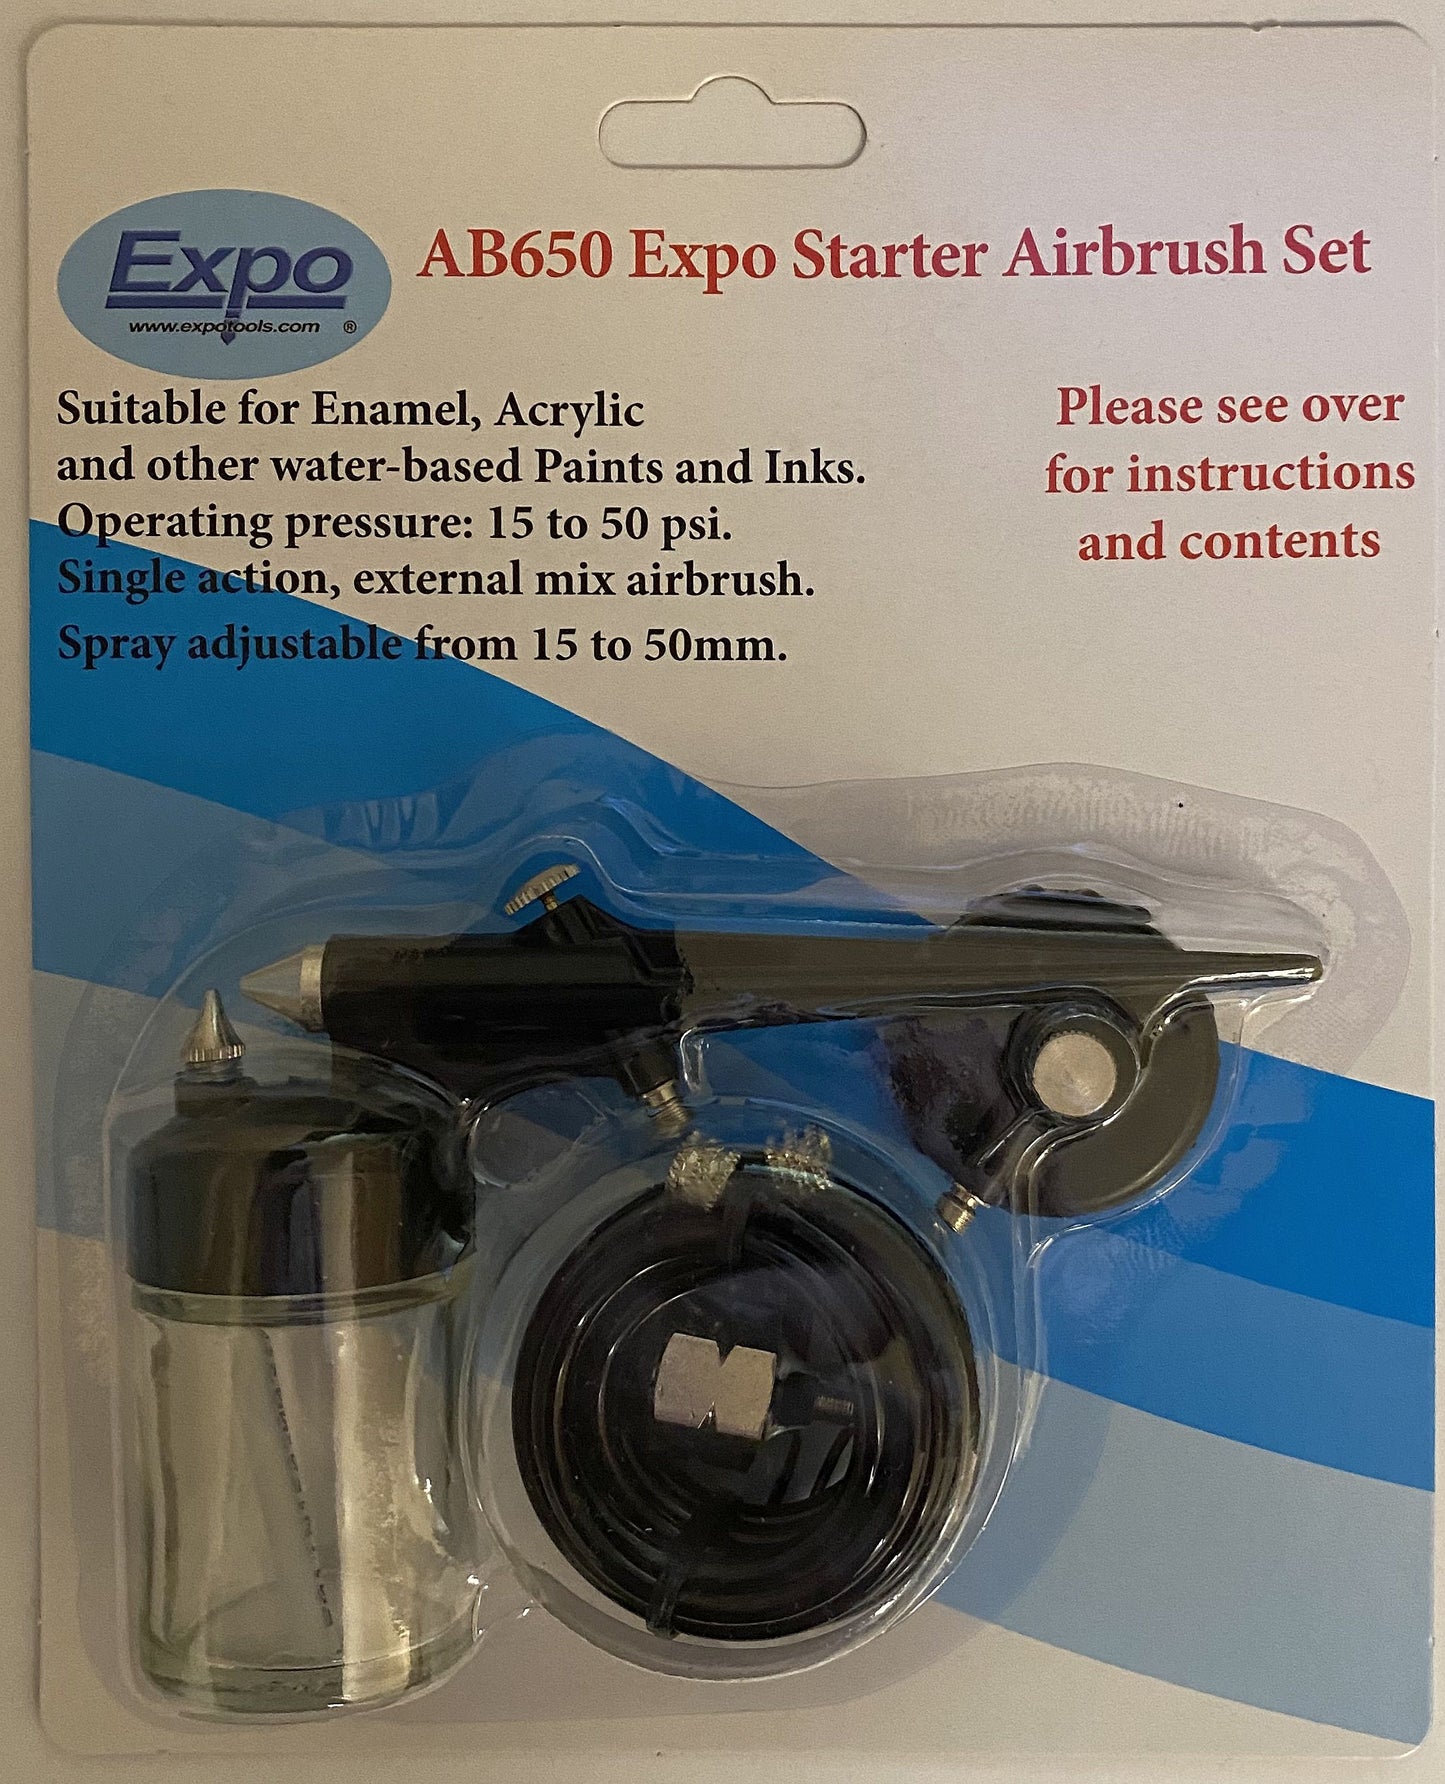 Expo AB650 Airbrush Starter Set With Hose Regulator & Connector